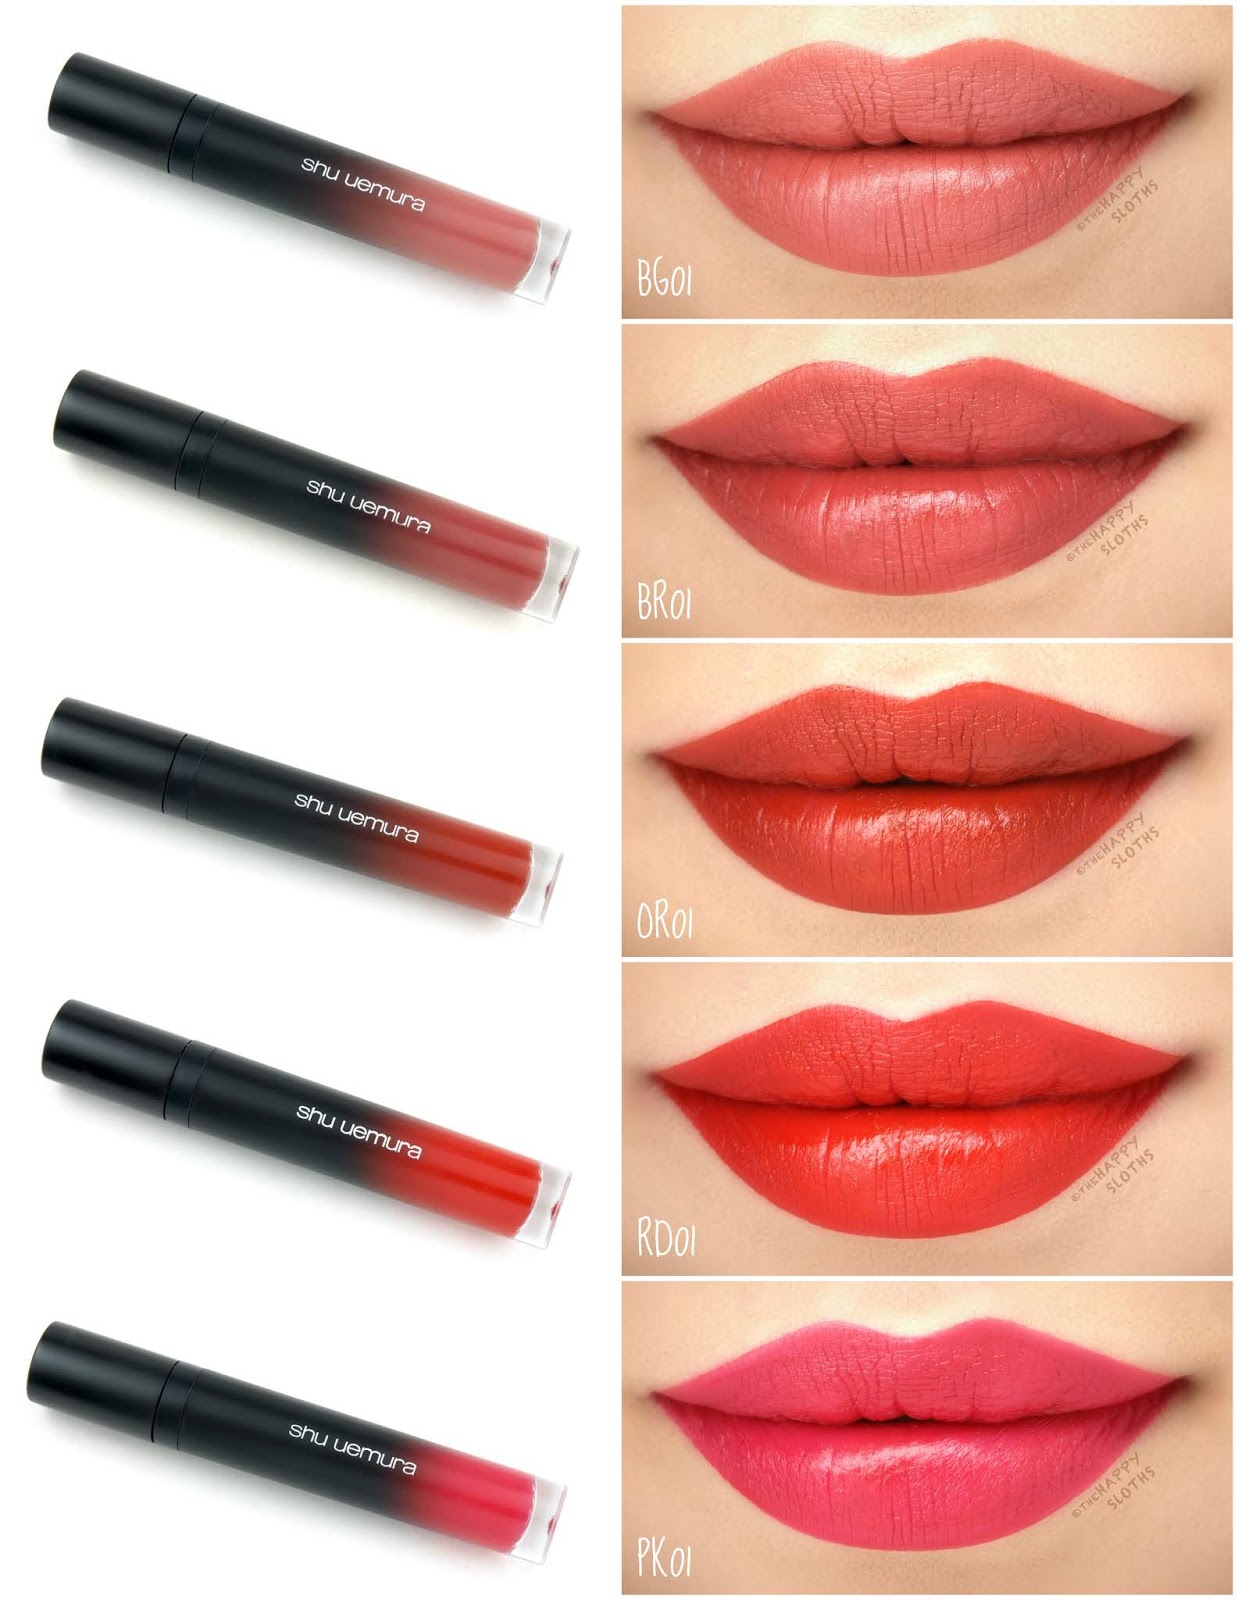 Shu Uemura | Matte Supreme Lip Color in "BG 01", "BR 01", "OR 01", RD 01" & "PK 01": Review and Swatches